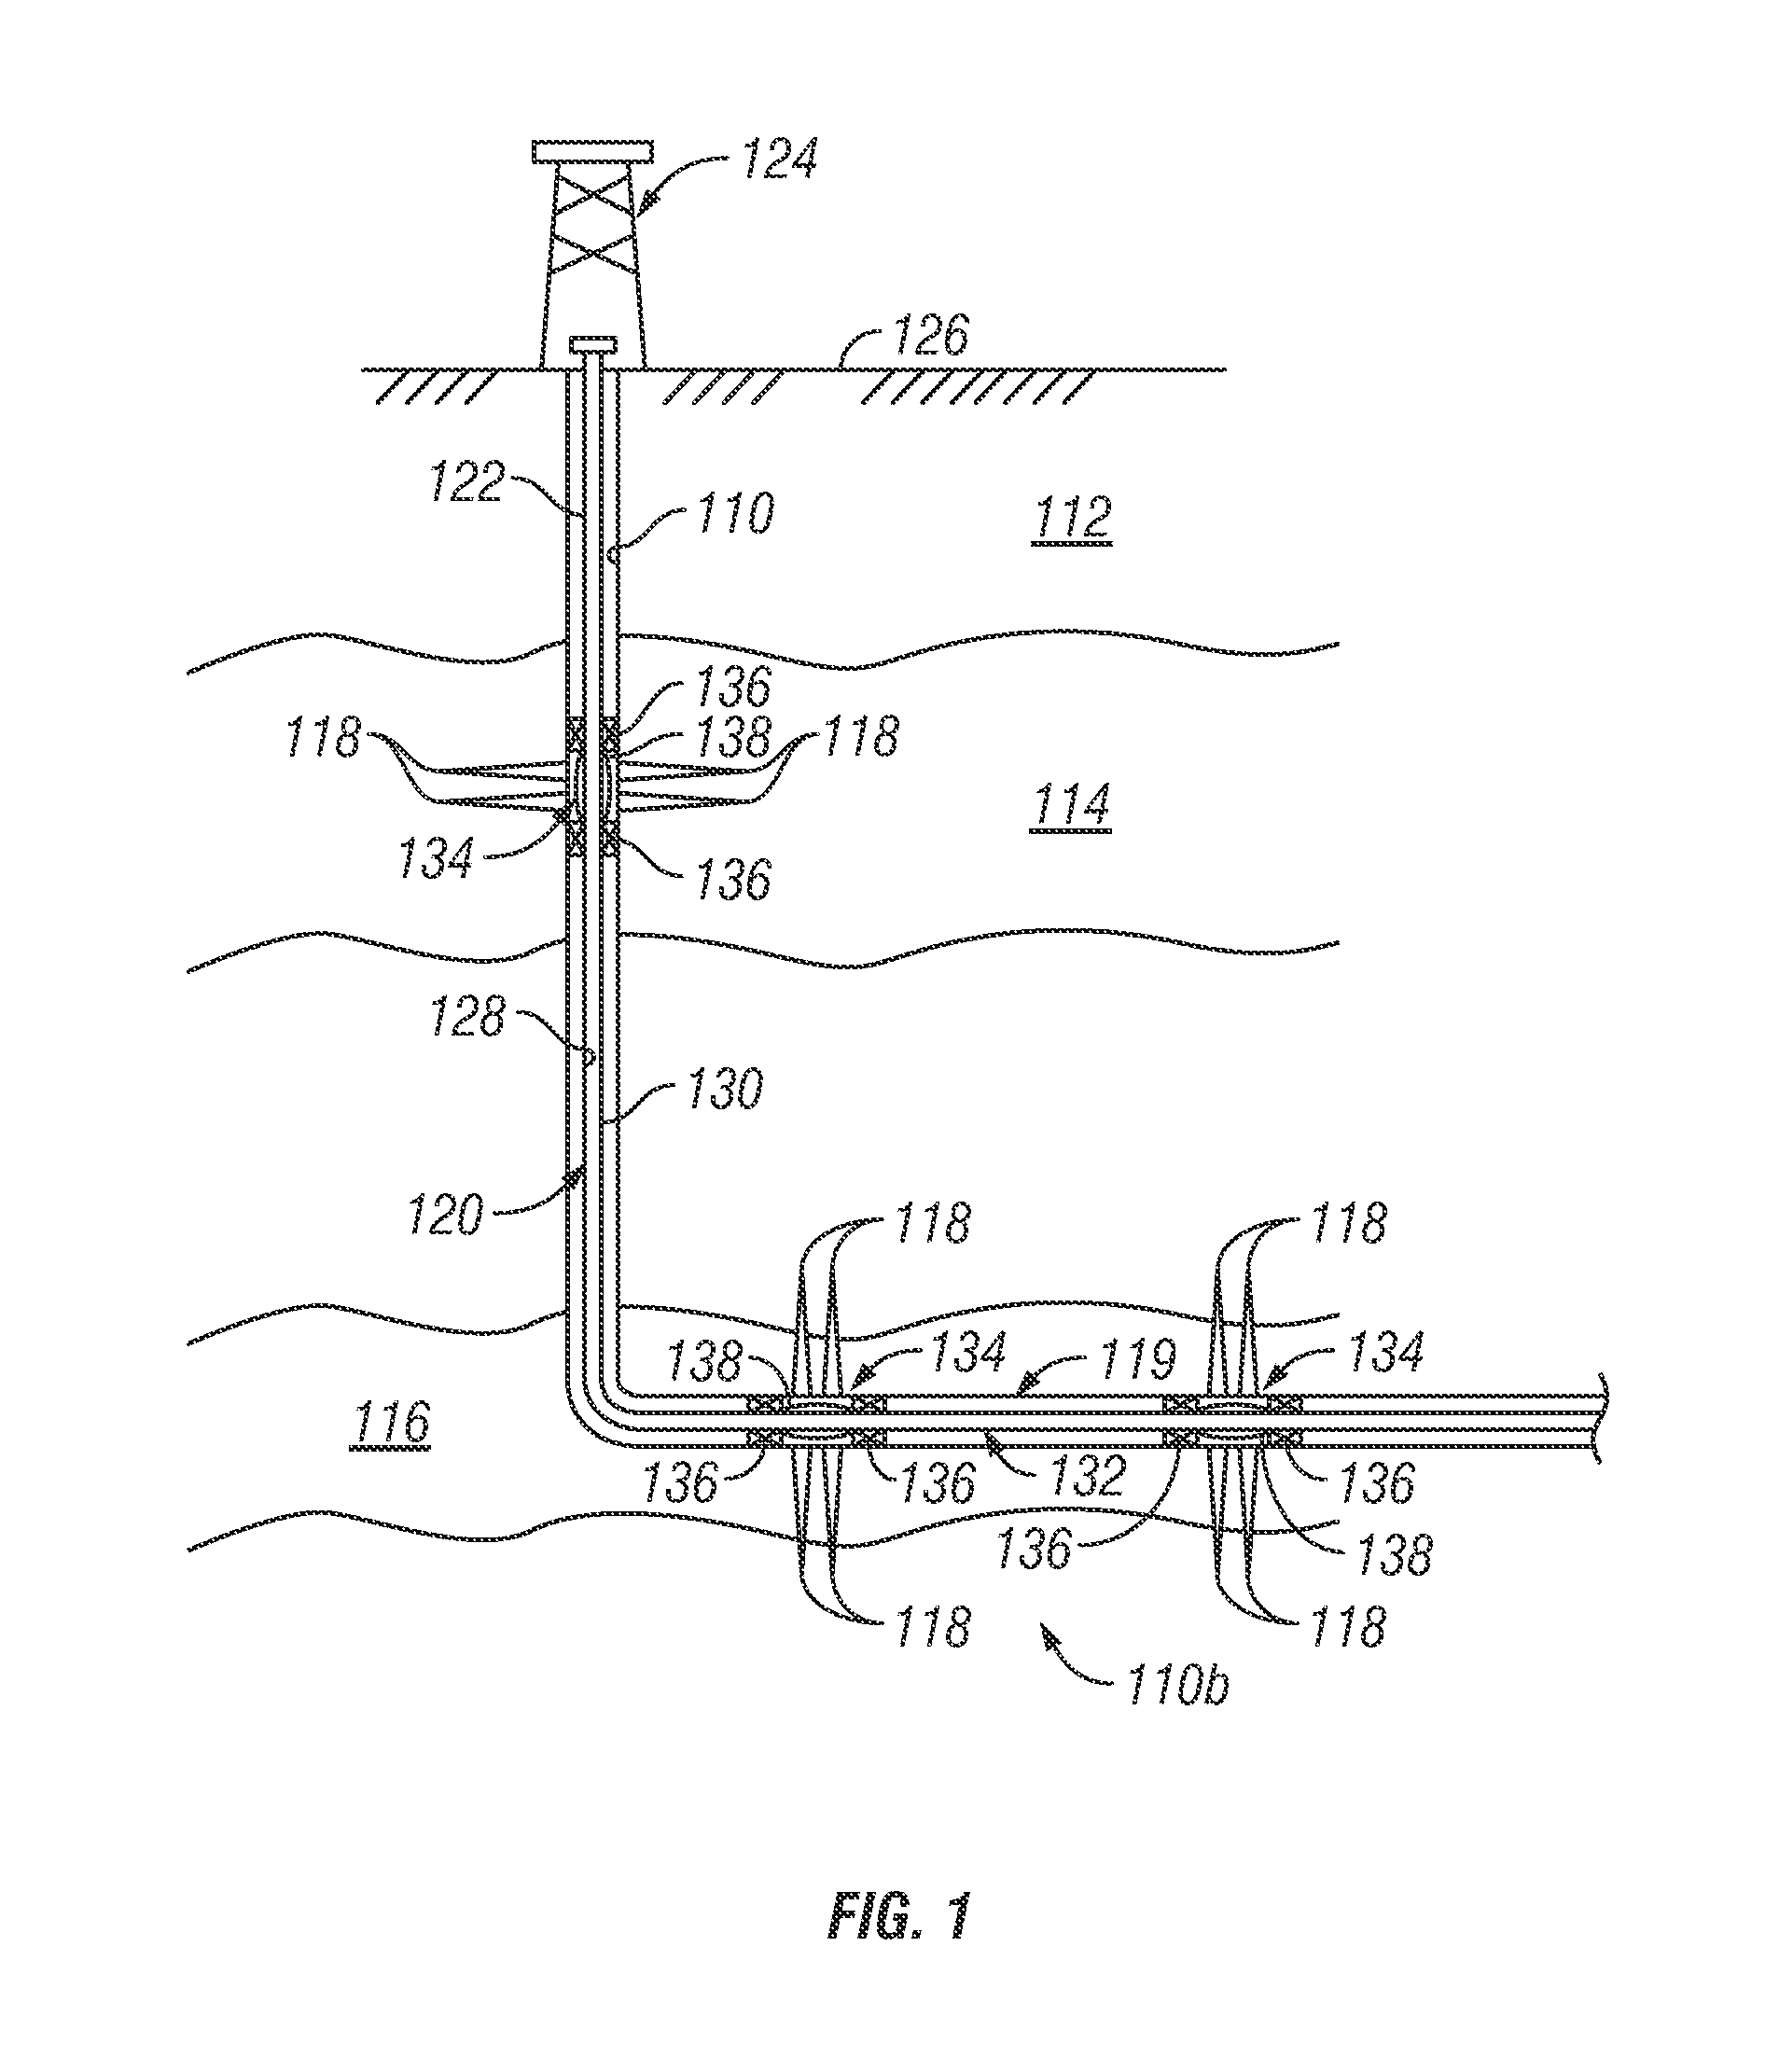 Downhole-Adjustable Flow Control Device for Controlling Flow of a Fluid Into a Wellbore